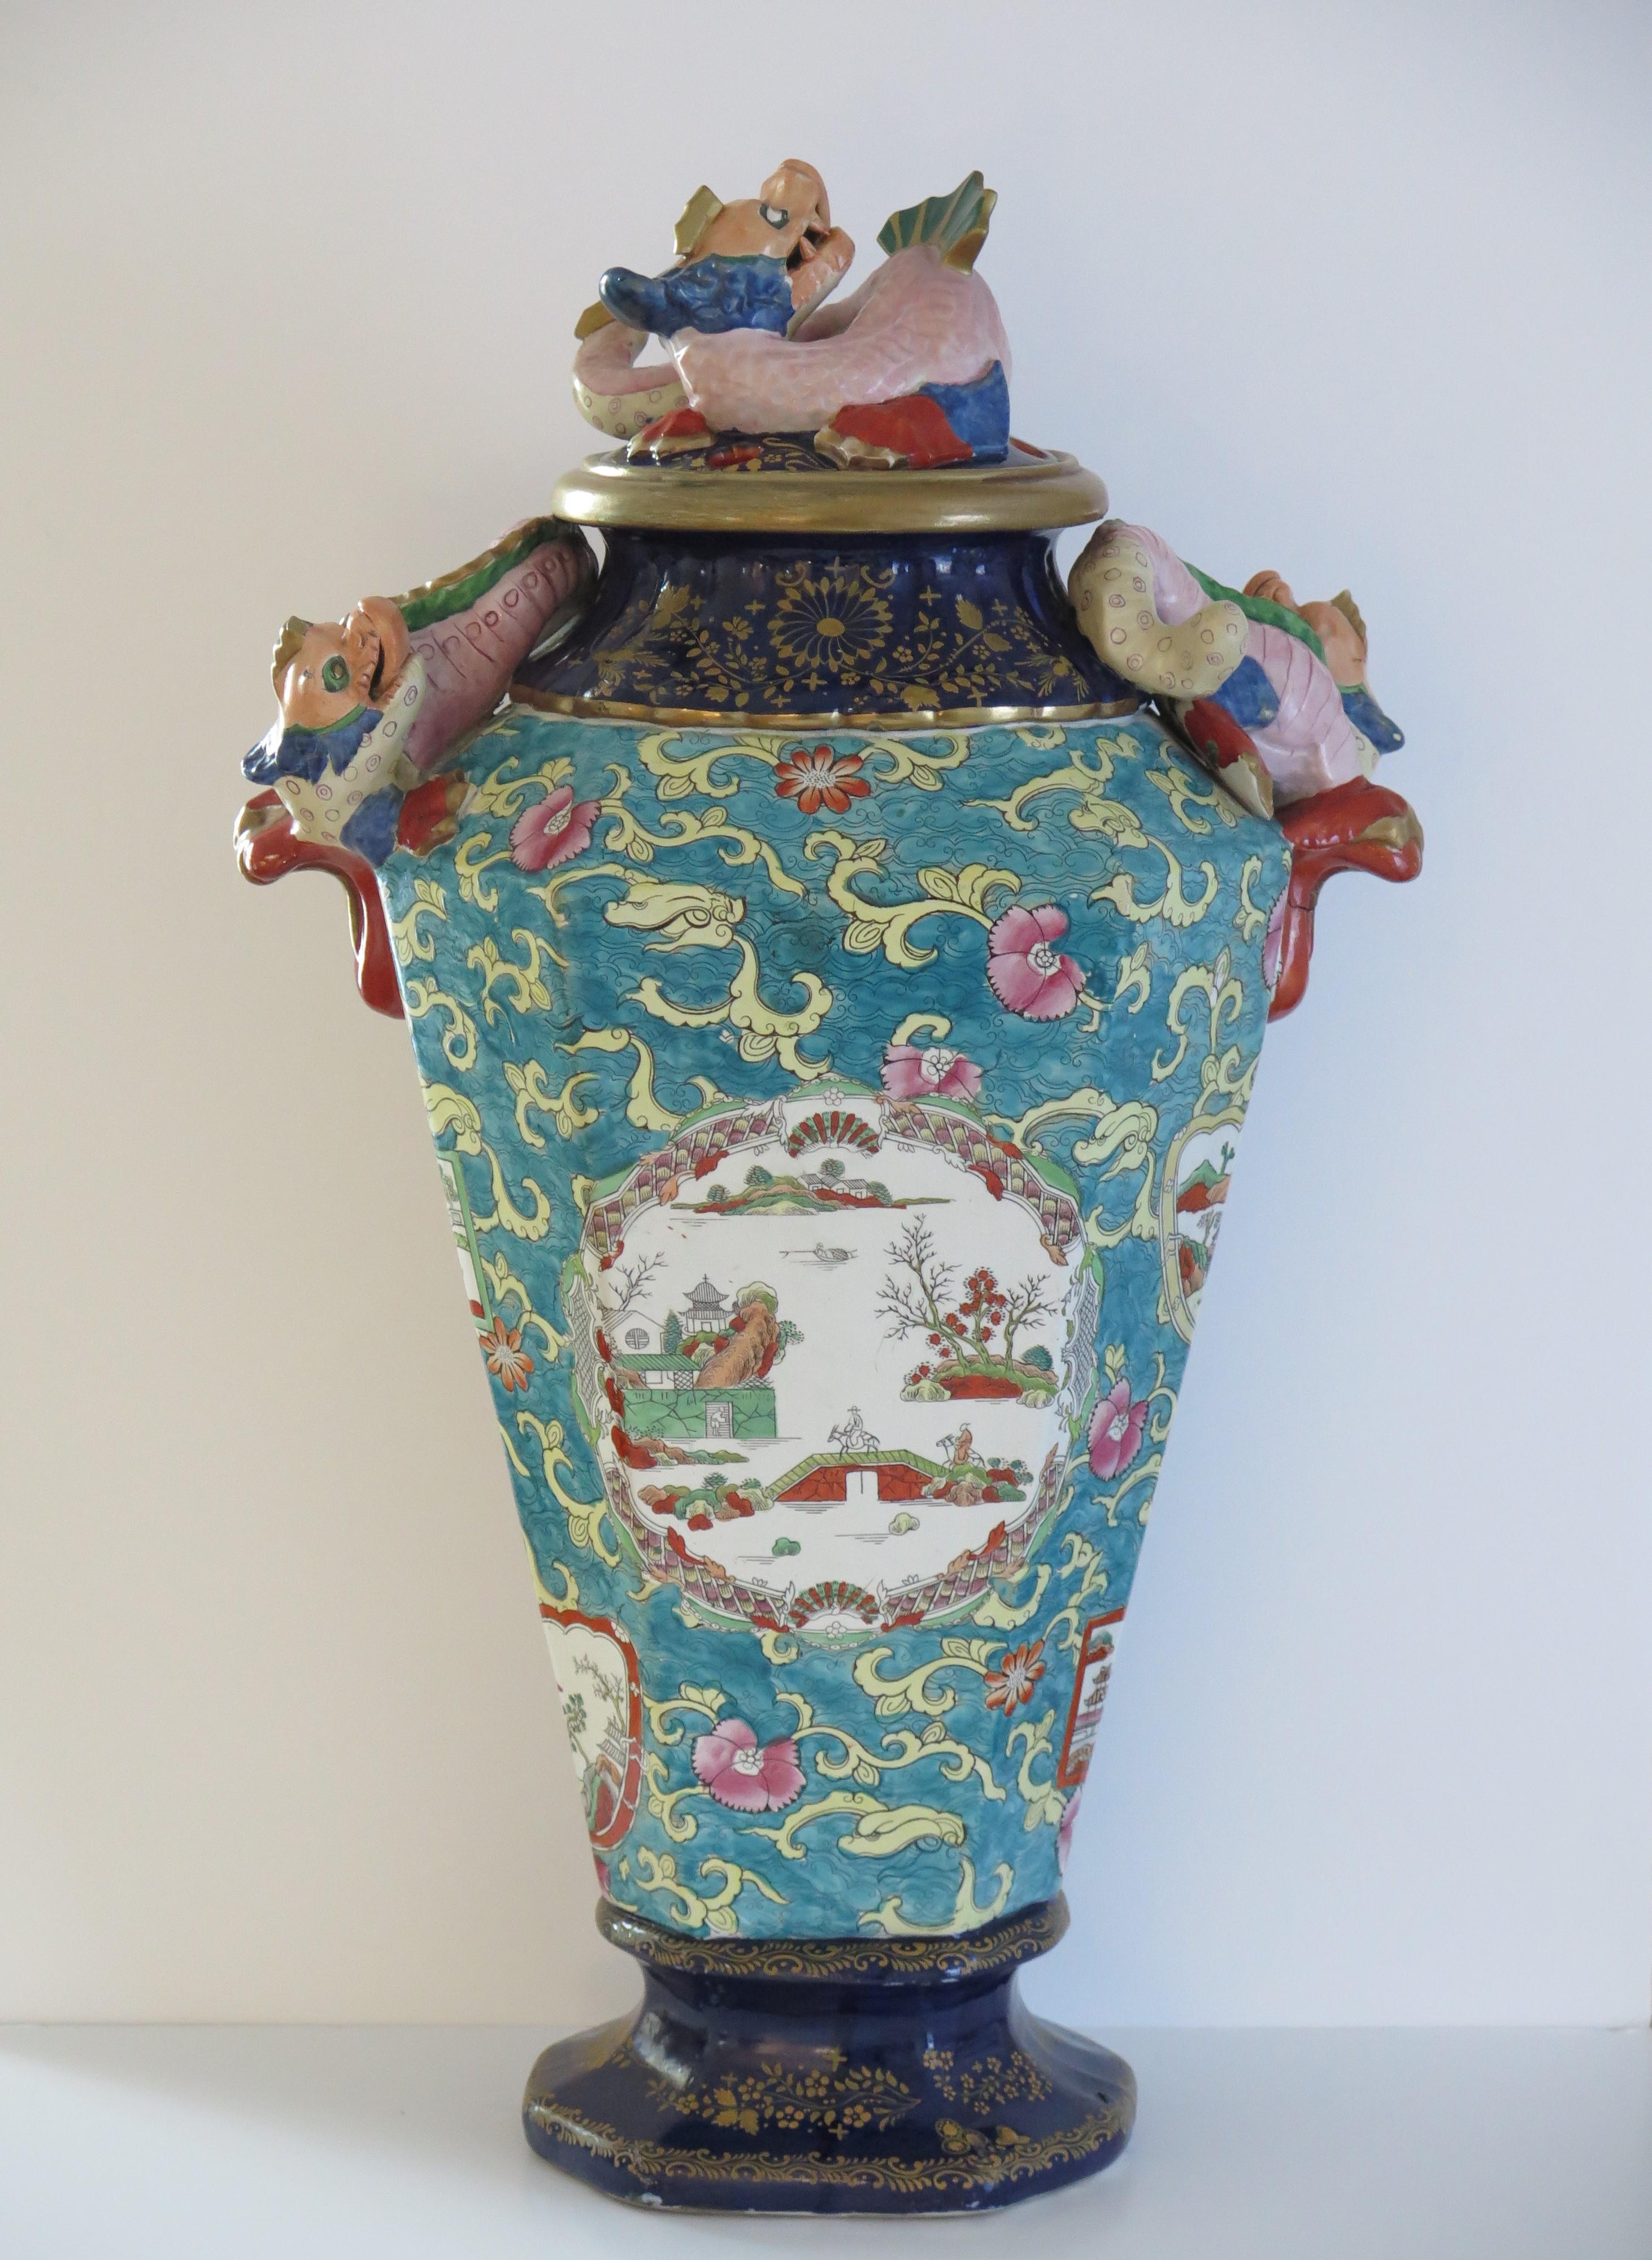 This is a very rare, highly individual and very decorative, Large Lidded Vase in the Chinoiserie style, made by Mason's Ironstone in the George 1Vth period, circa 1825.

The vase is well potted with a tapering hexagonal form on a raised pedastal